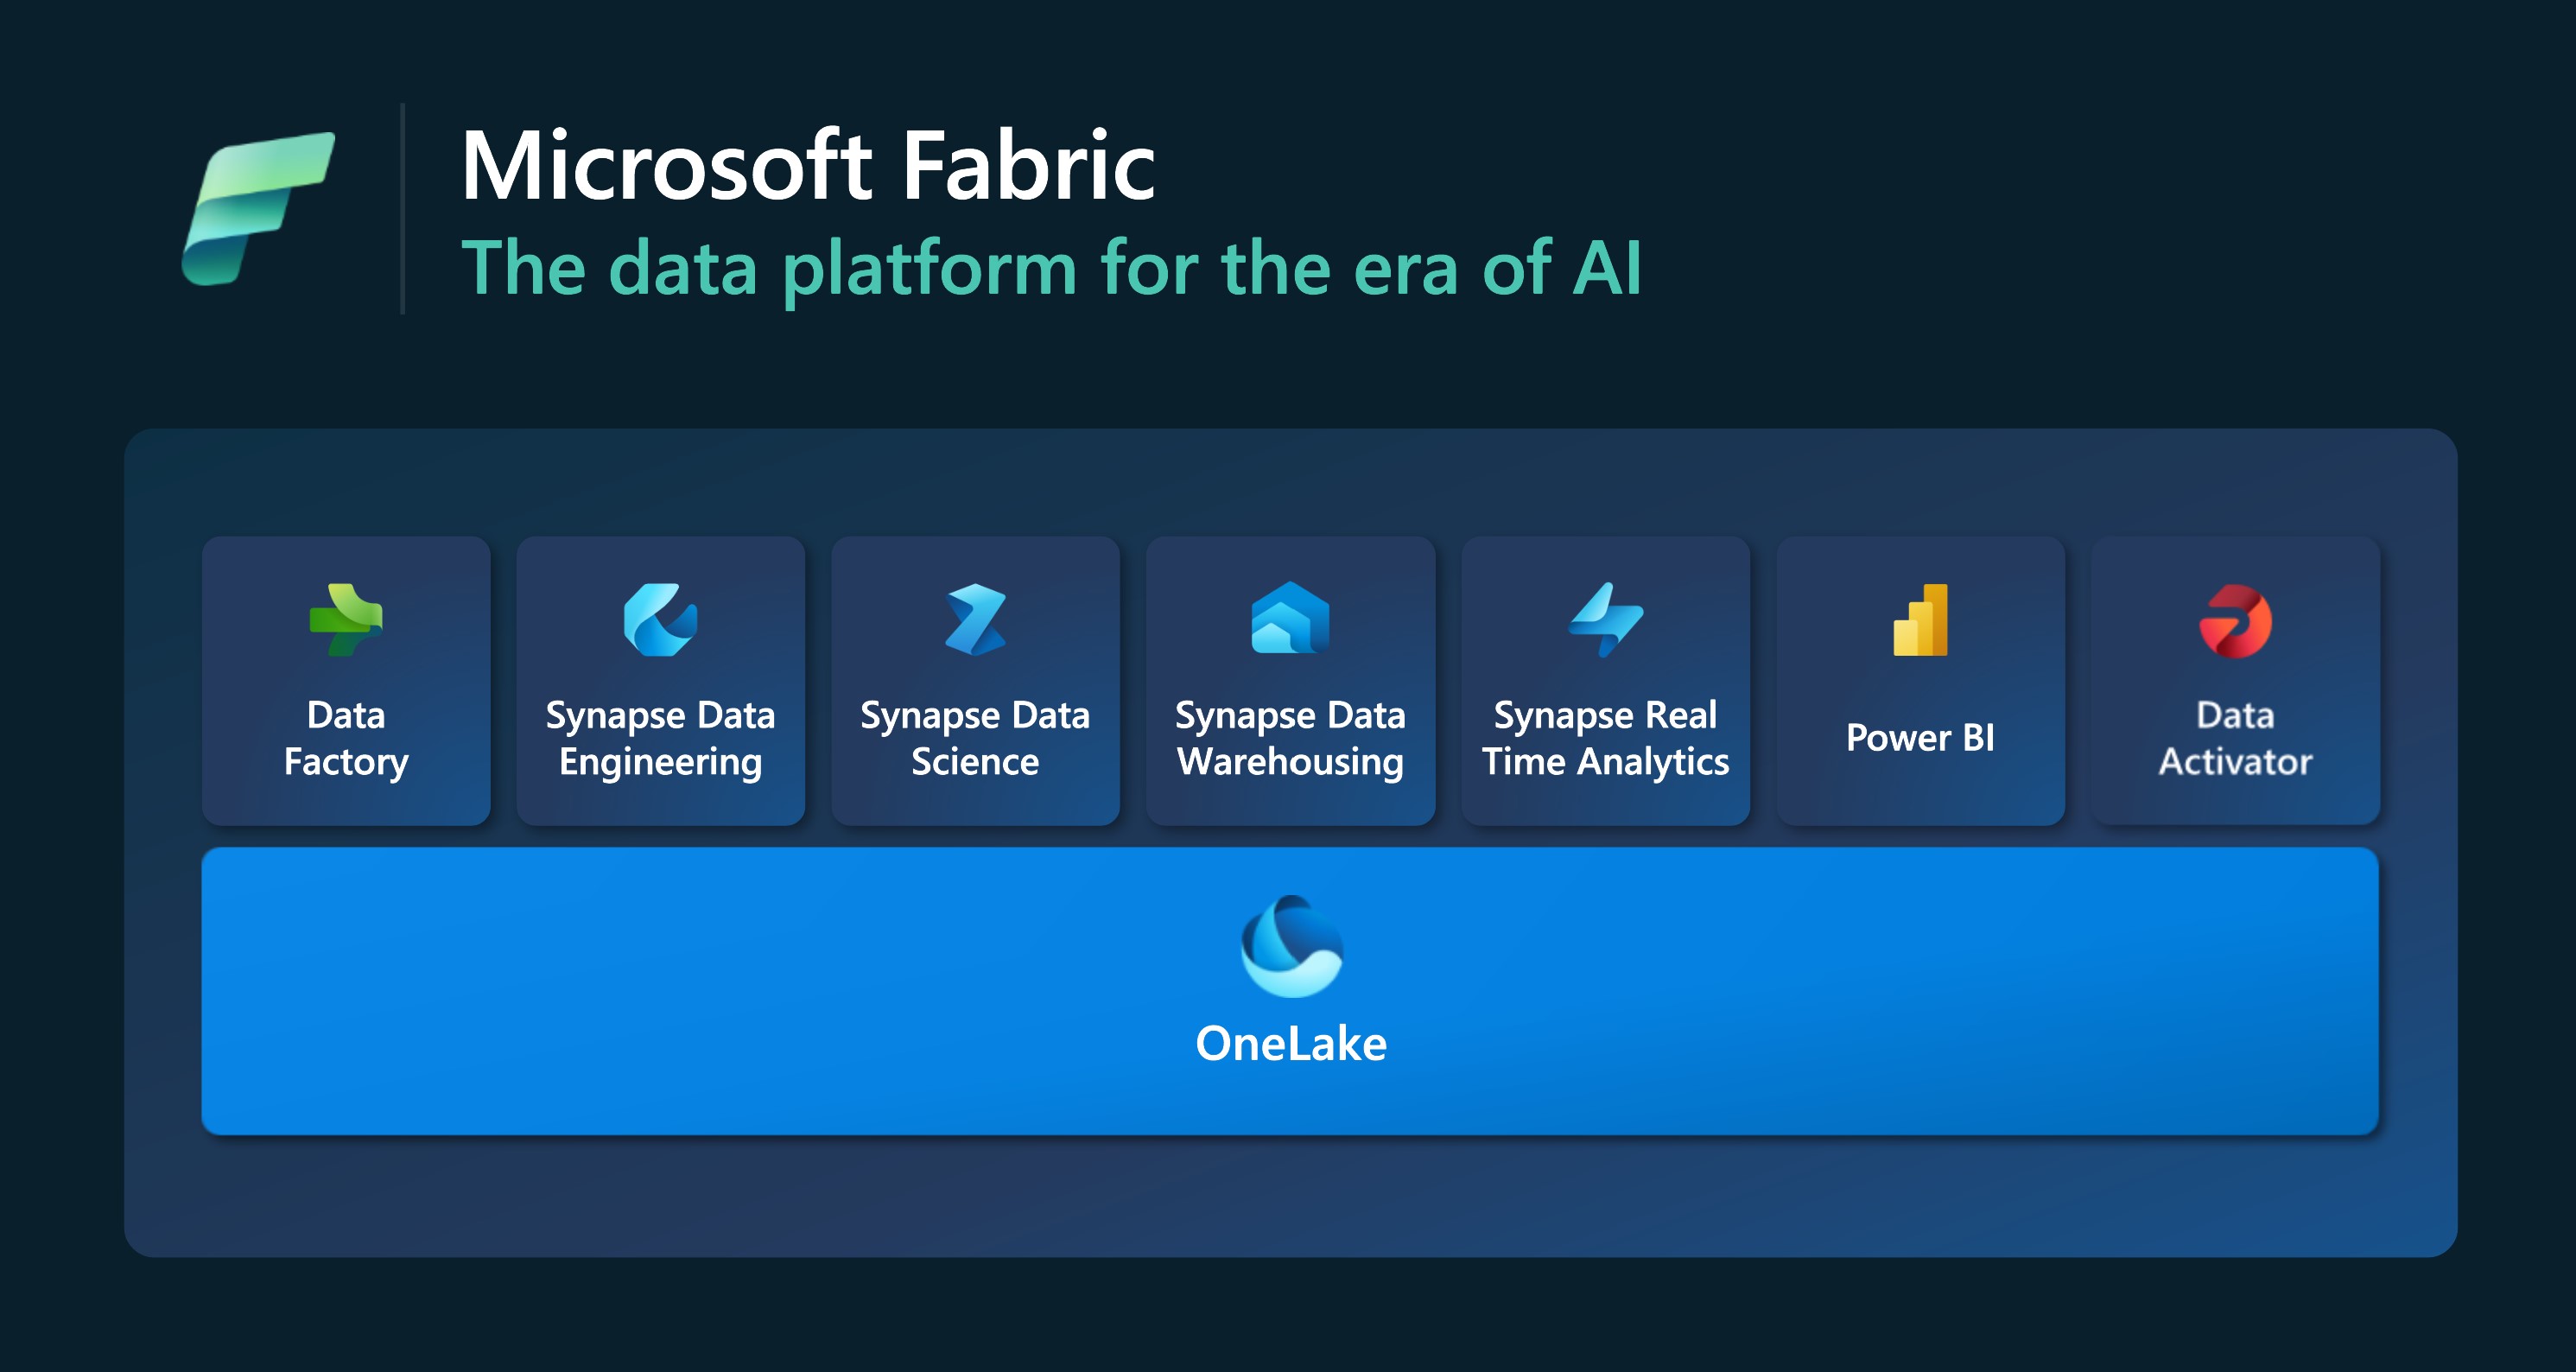 Microsoft launches Fabric, a new end-to-end data and analytics platform